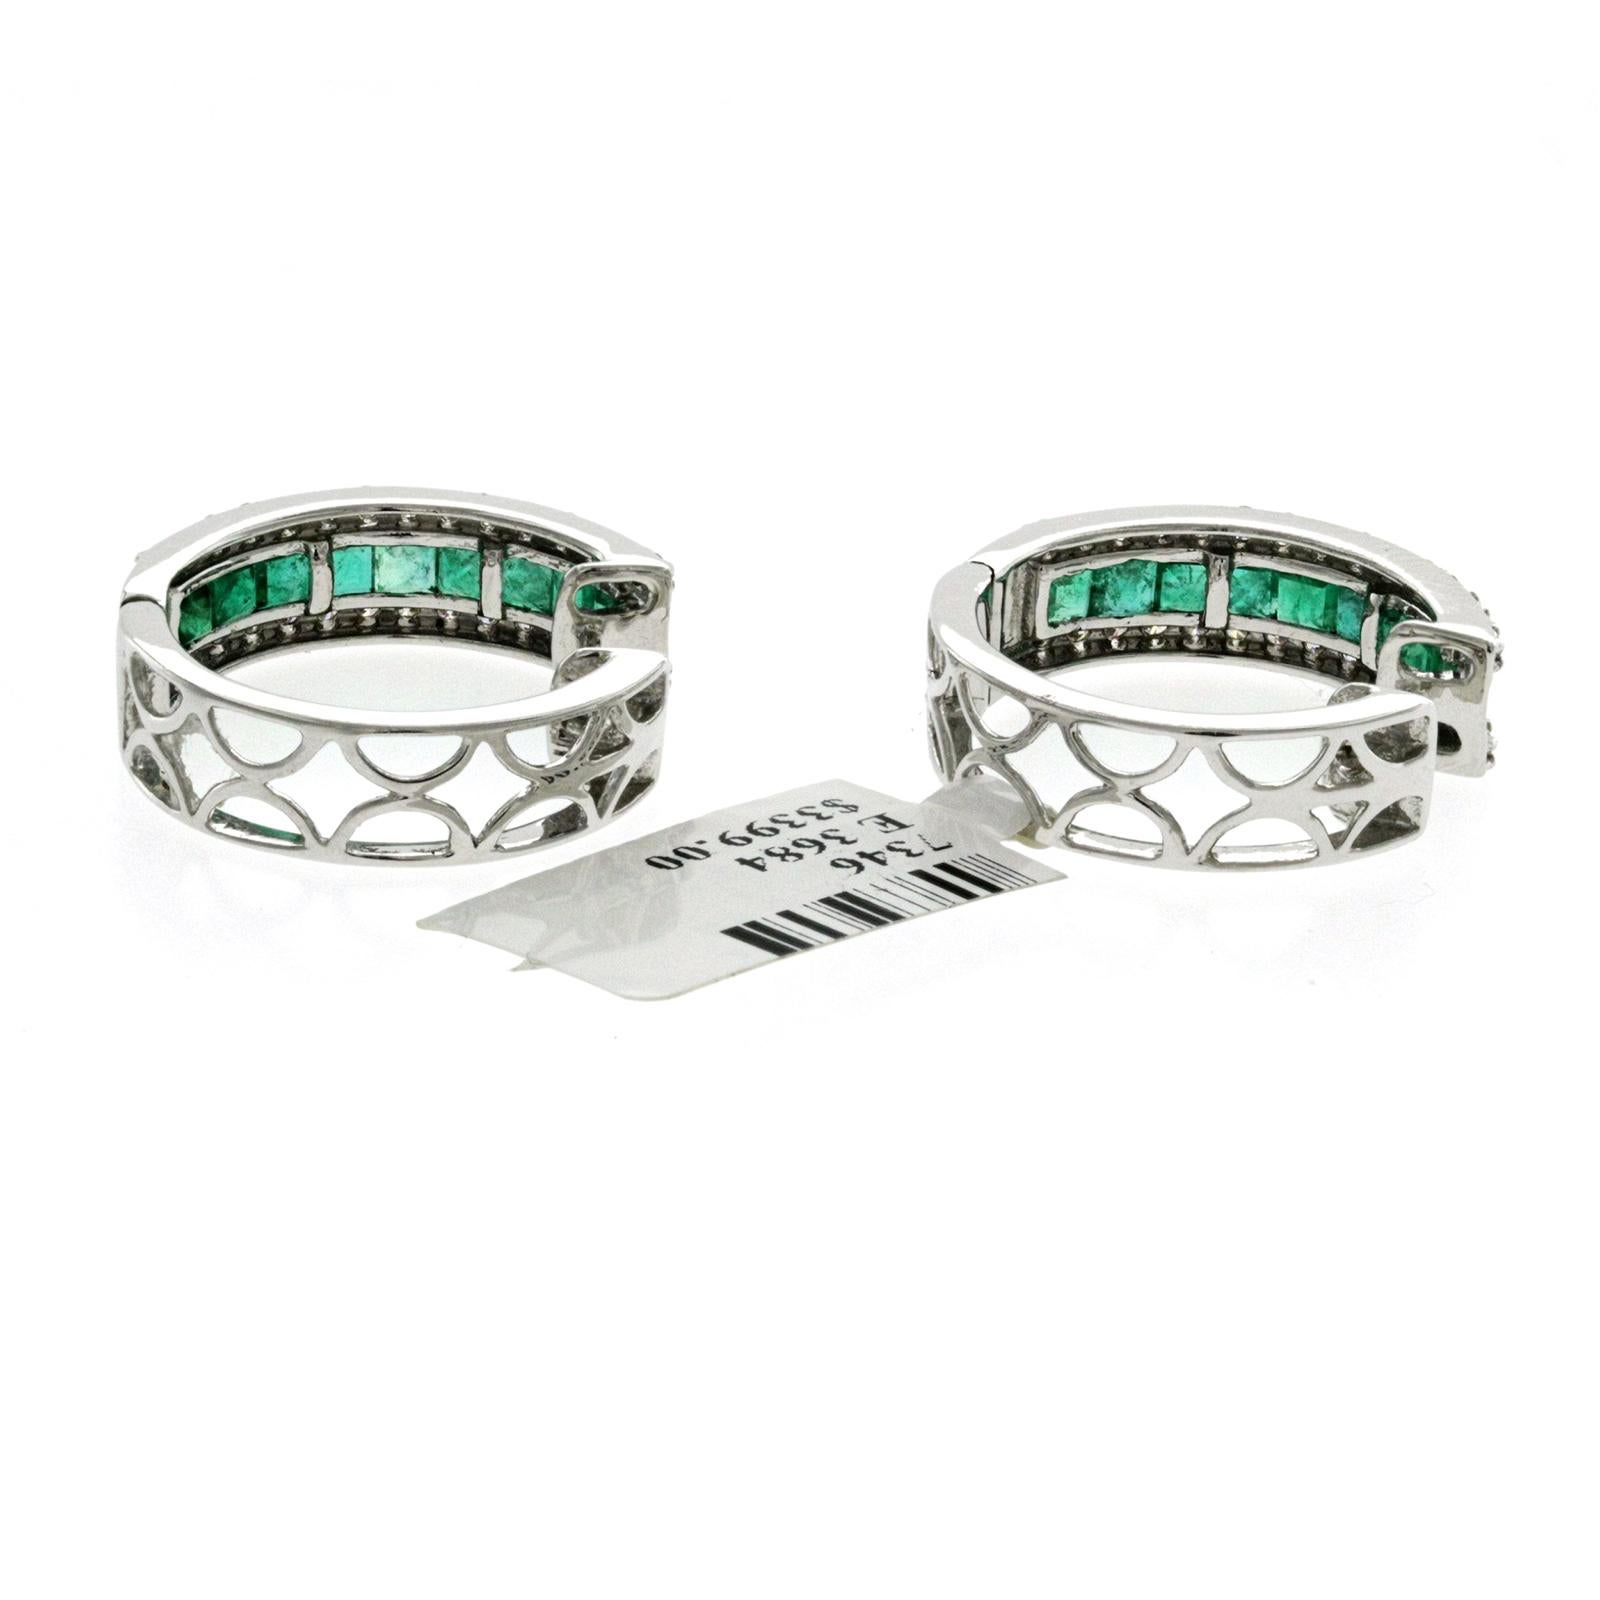 0.98 CT Colombian Emerald and 0.34 Carat Diamonds 14k White Gold Hoop Earrings In Excellent Condition For Sale In Los Angeles, CA